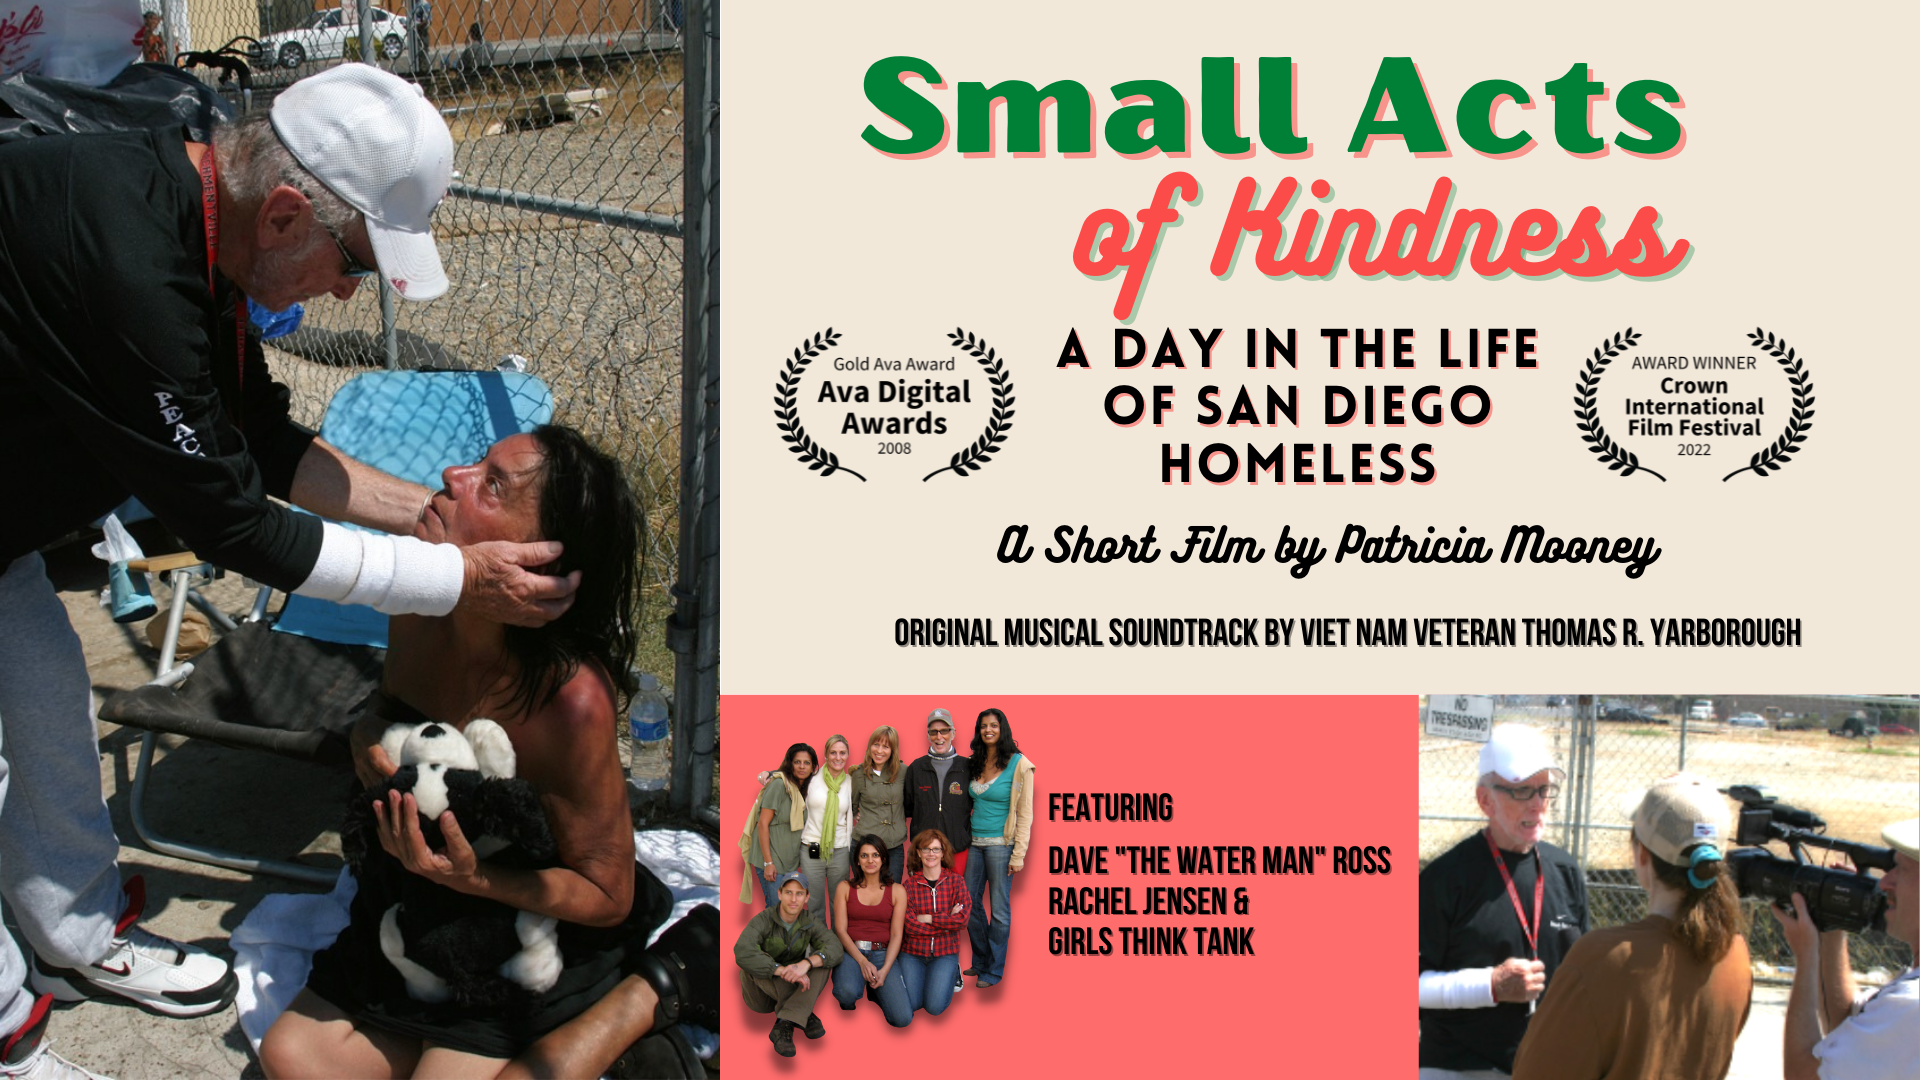 Small Acts of Kindness Multi Award Winning Documentary on San Diego Homeless